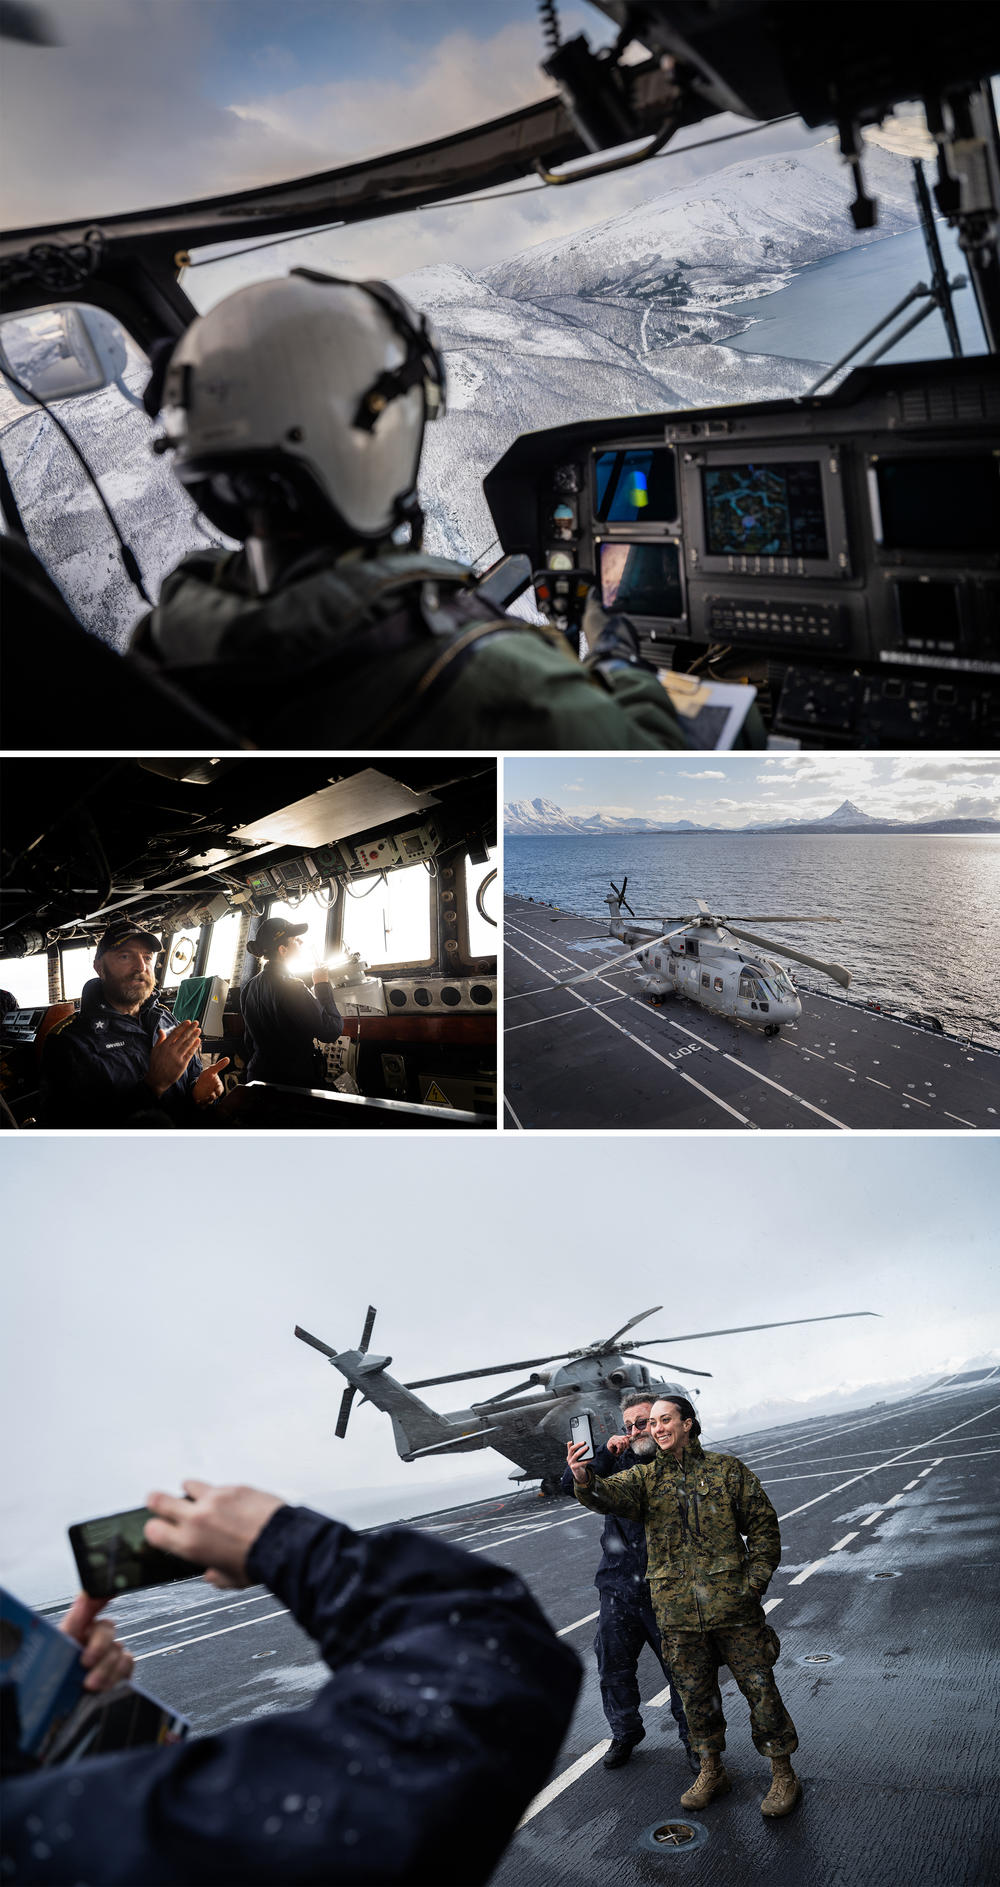 Top: A helicopter from Bjerkvik, Norway, flies en route to land on an aircraft carrier at sea. Middle left: The ship's captain, Marcello Grivelli, and STV Caterina Massaro in the bridge of the carrier. Bottom: Grivelli takes a selfie on the flight deck with U.S. Marine Corps 1st Lt. Stephanie Baer, in a sudden snowstorm.